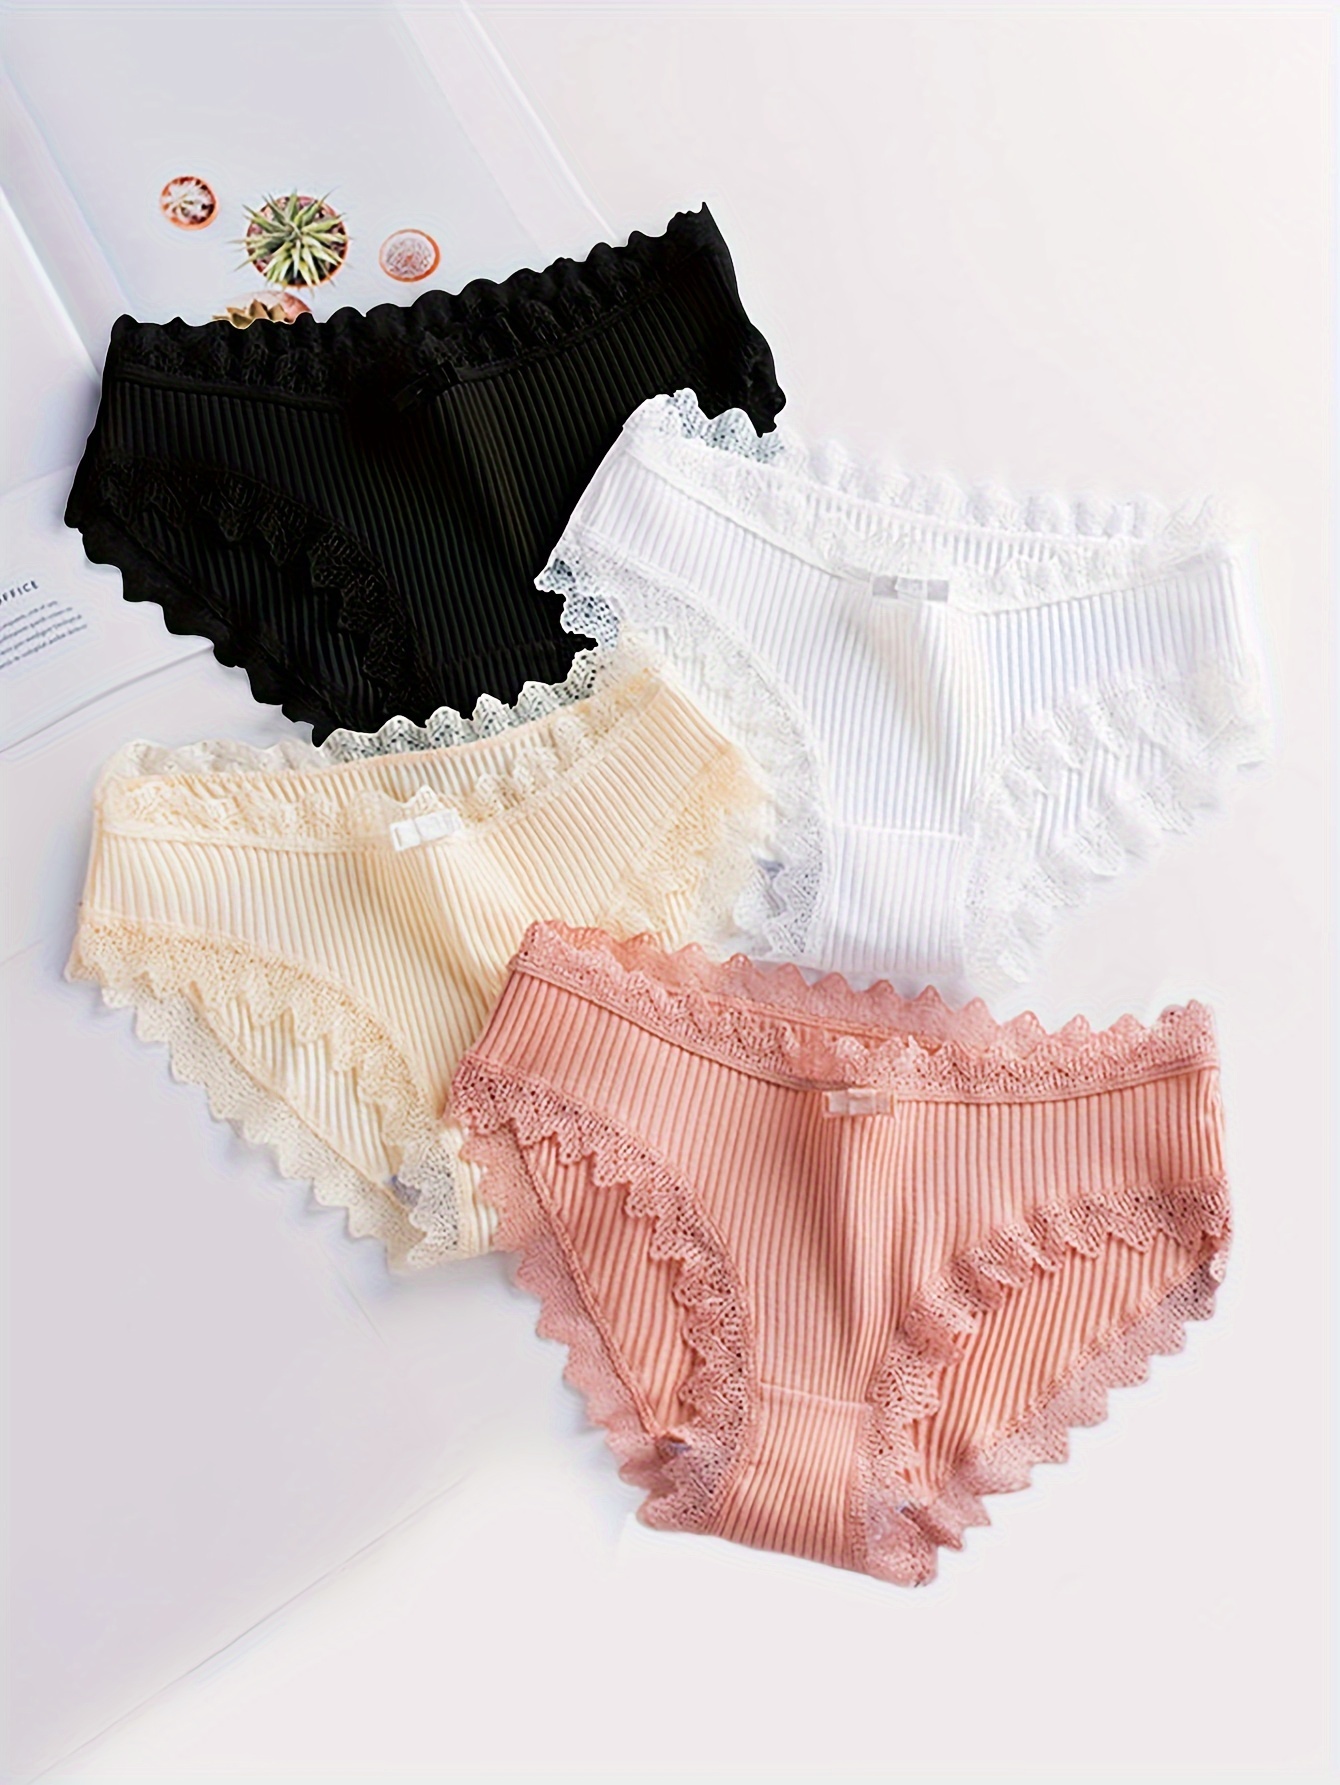 New Women's Threaded Cotton Panties Japanese Style Girls Briefs Mid-waist  Solid Seamless Lace Underpants Lingerie Cute Underwear